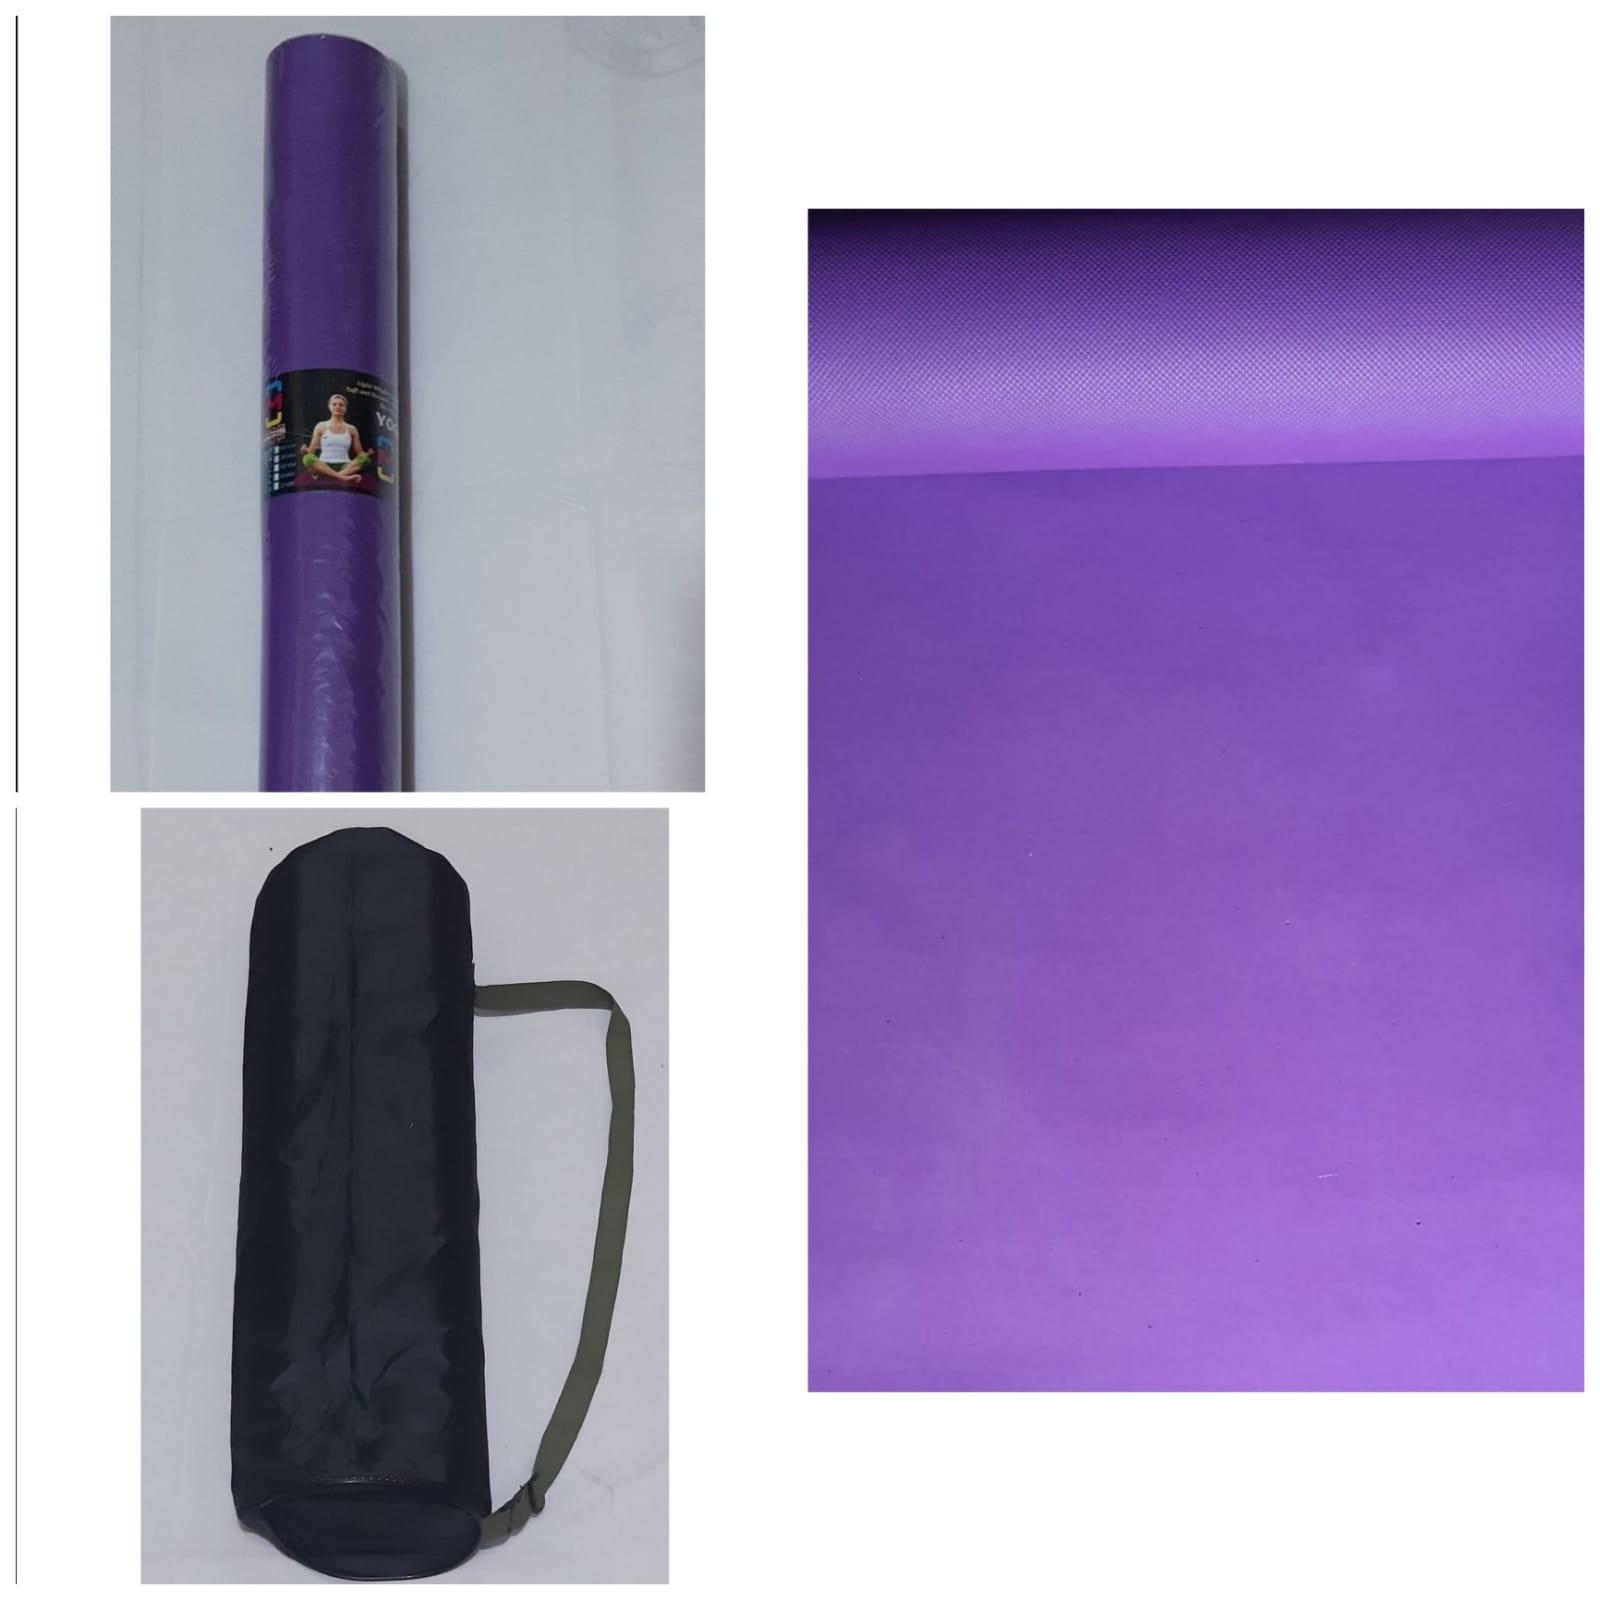 Yoga Mat (4mm) with Carry Bag for Home Gym & Outdoor Workout, Water Resistant, Light Weight, Easy to Fold, Anti-Slip Mats for Men, Women & Kids (Purple Colour)